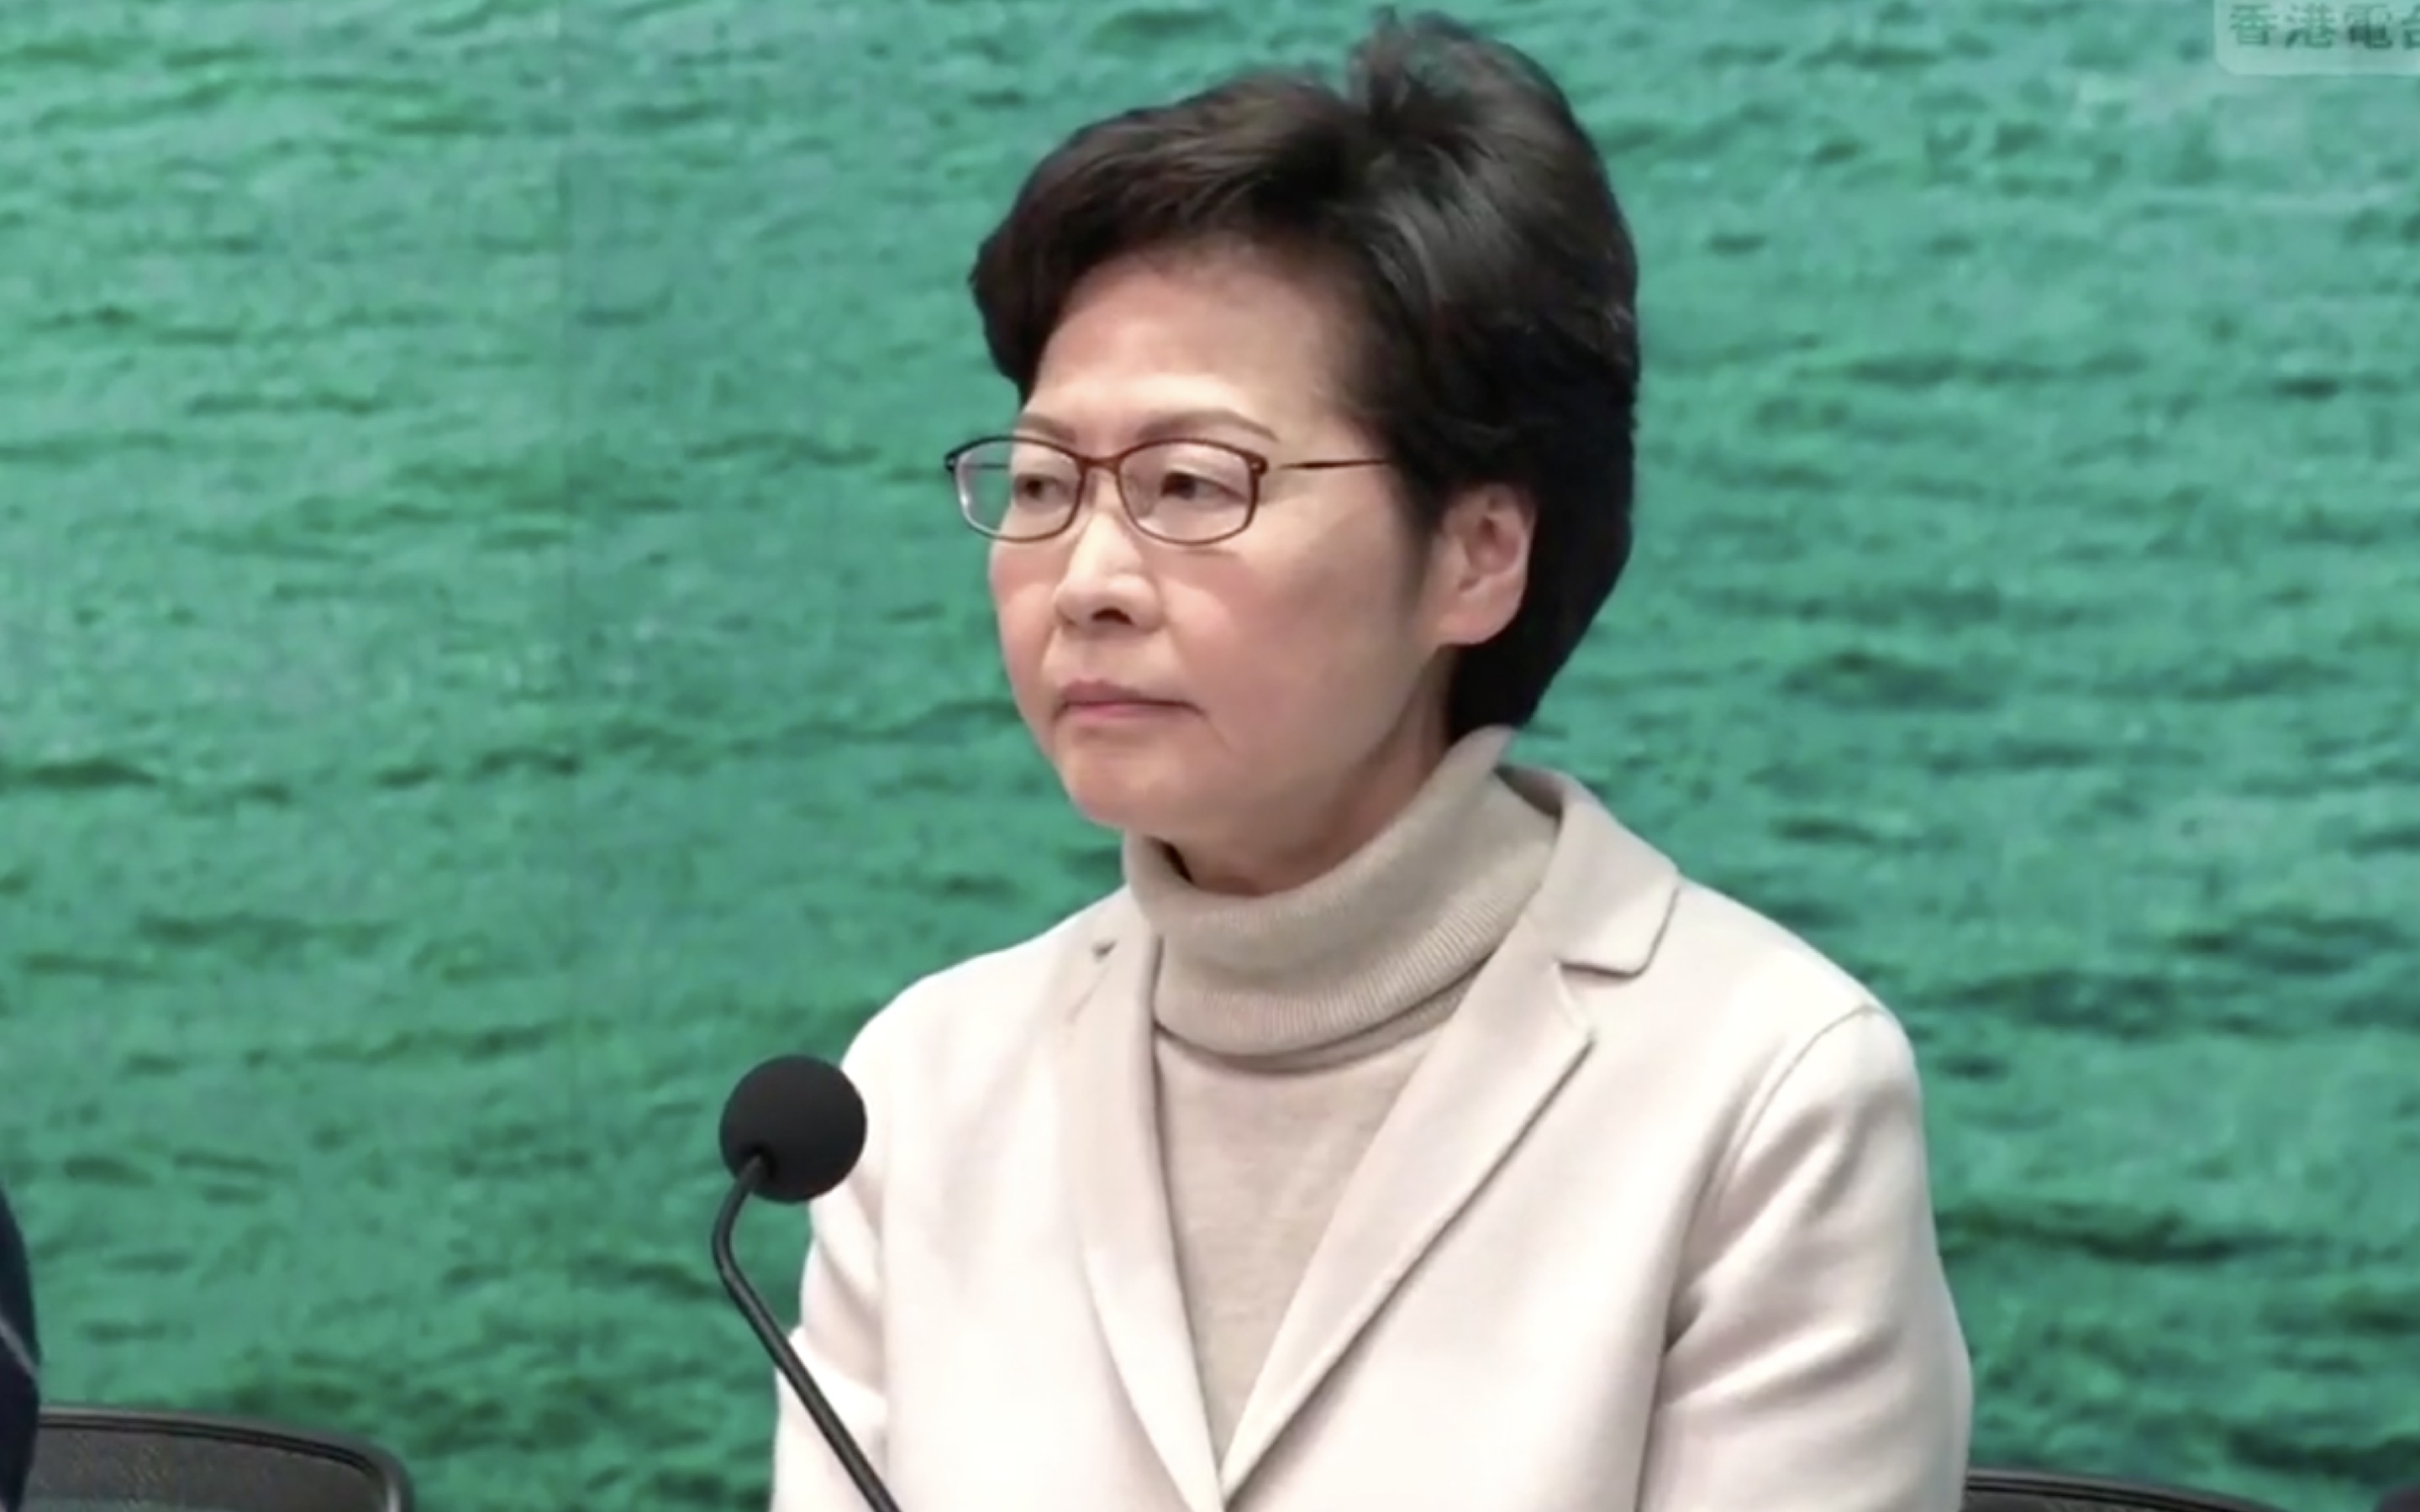 Chief Executive Carrie Lam announces the closure of more border checkpoints into the city after 15 people have been confirmed with the Wuhan coronavirus. Screengrab via Facebook/RTHK.